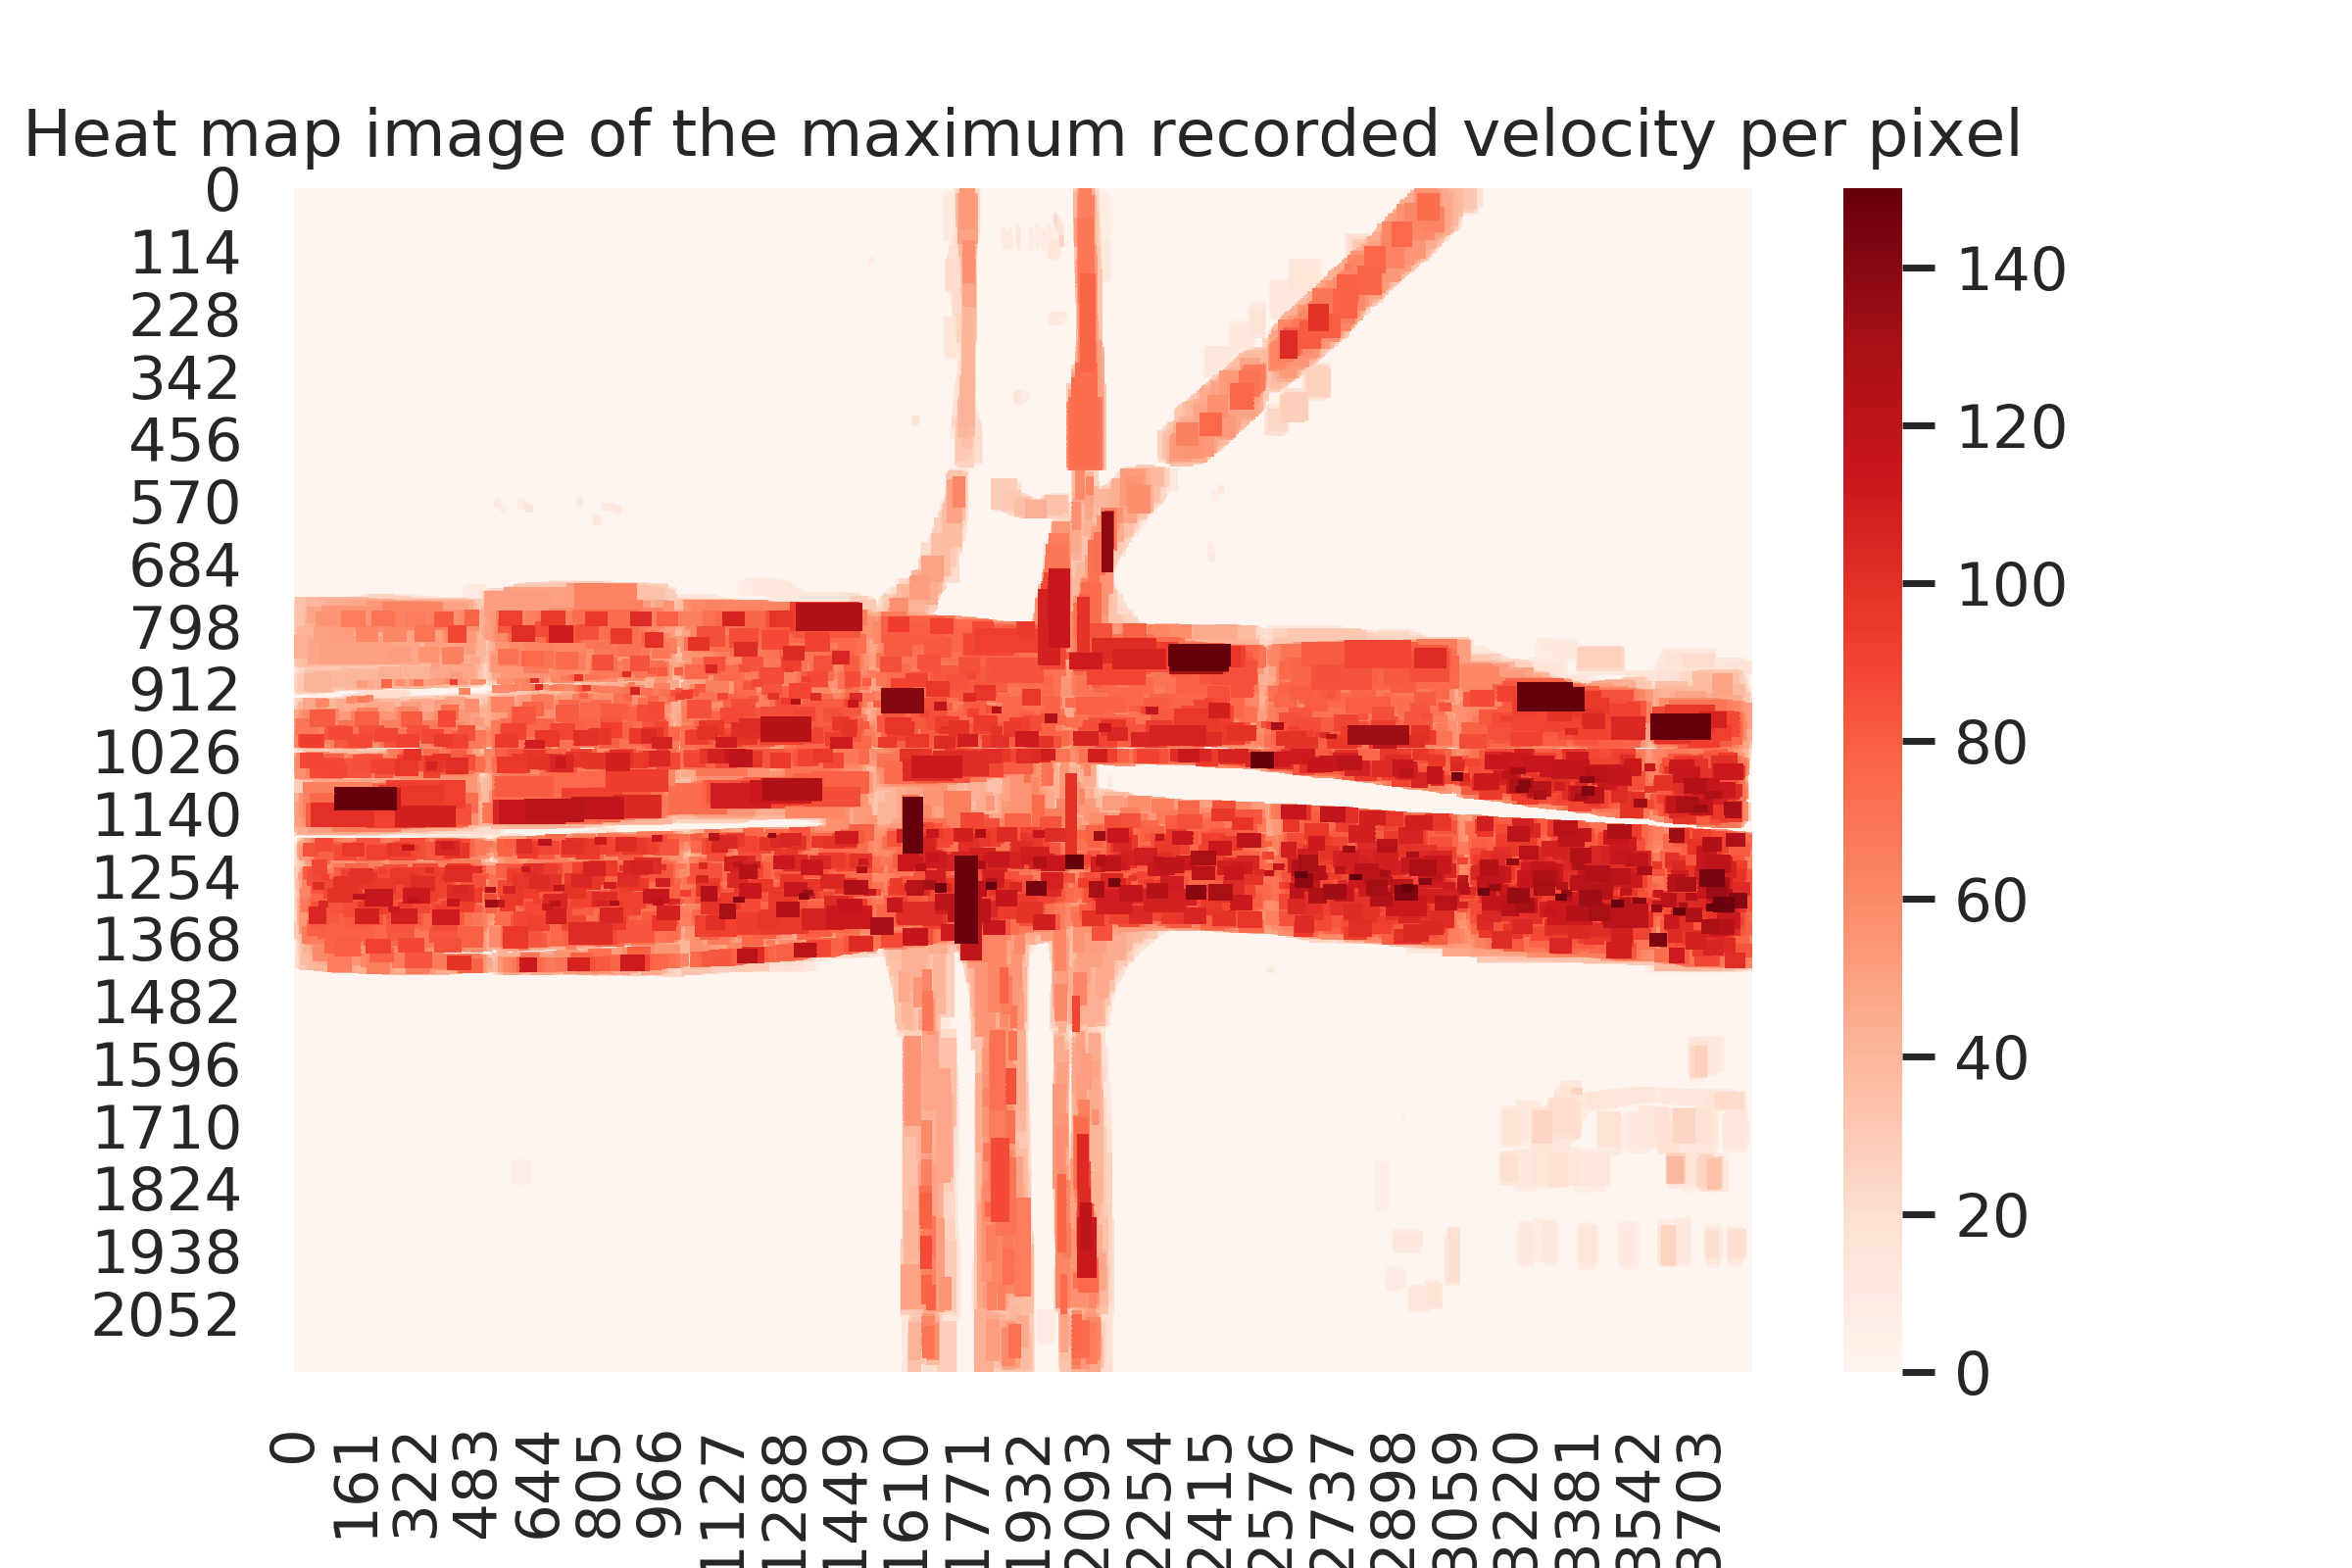 Heat_map_image_of_the_maximum_recorded_velocity_per_pixel.png